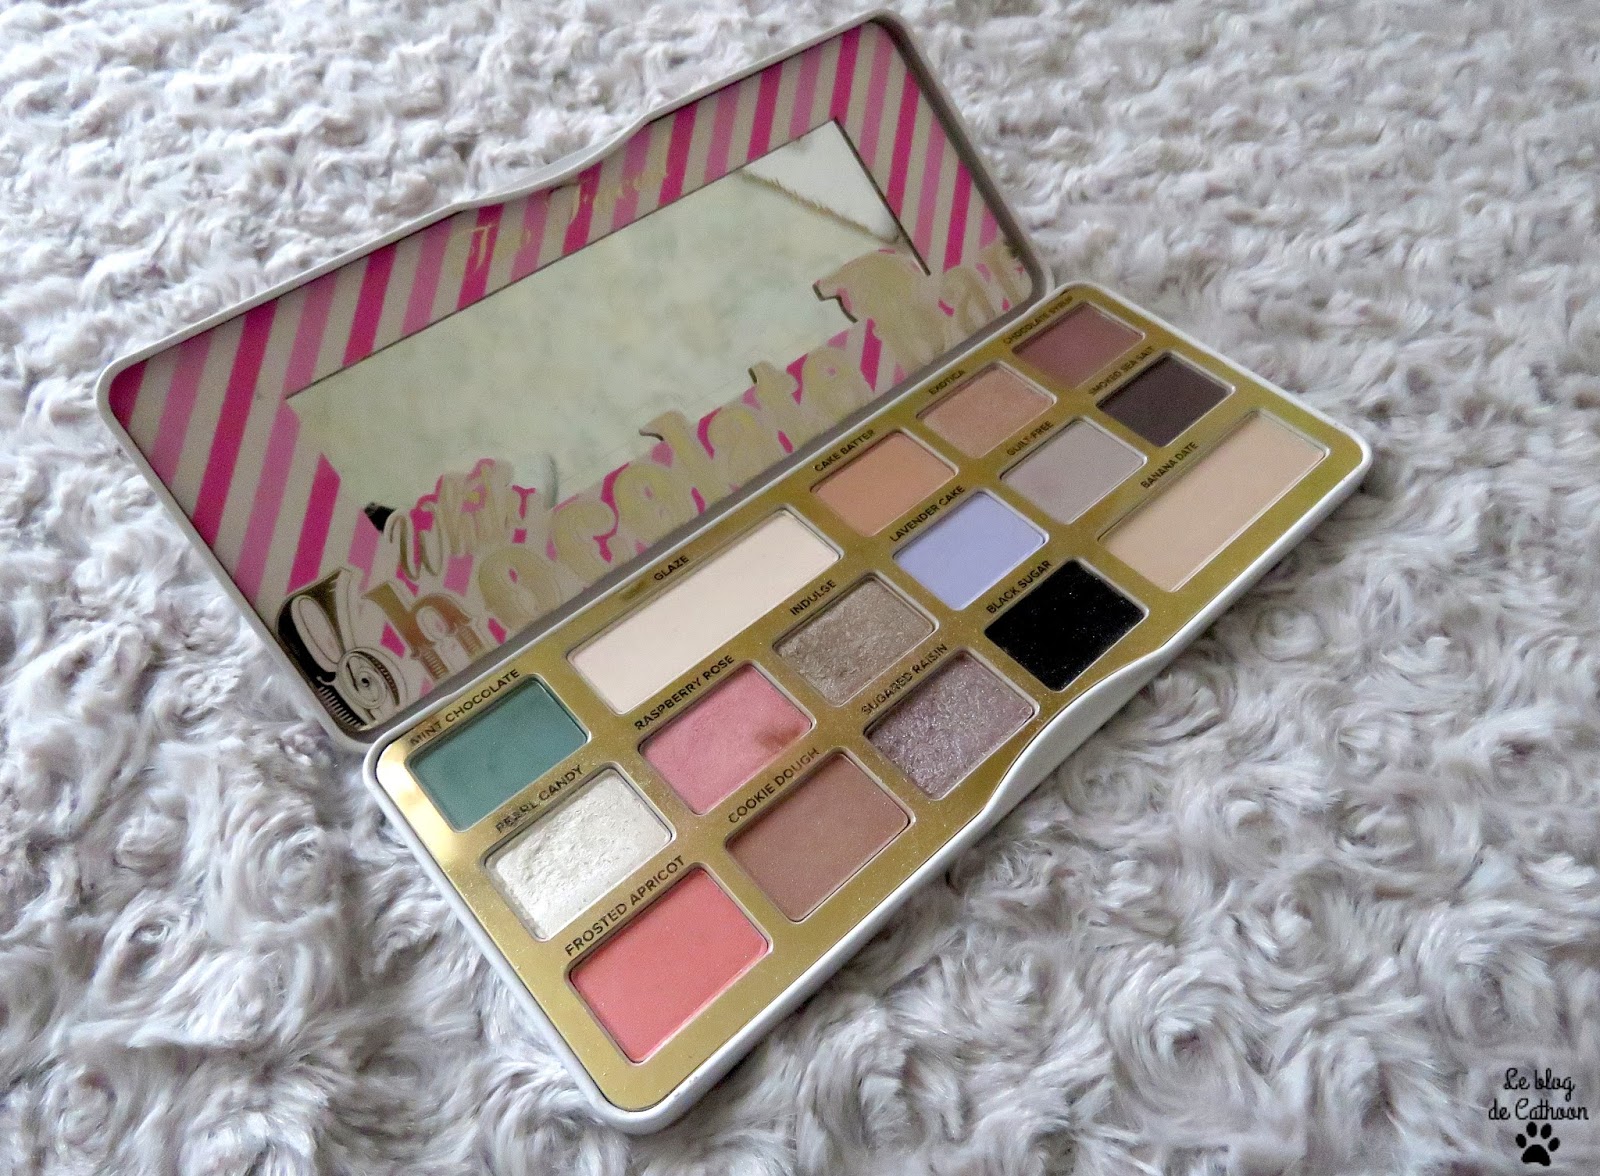 White Chocolate Bar Too Faced